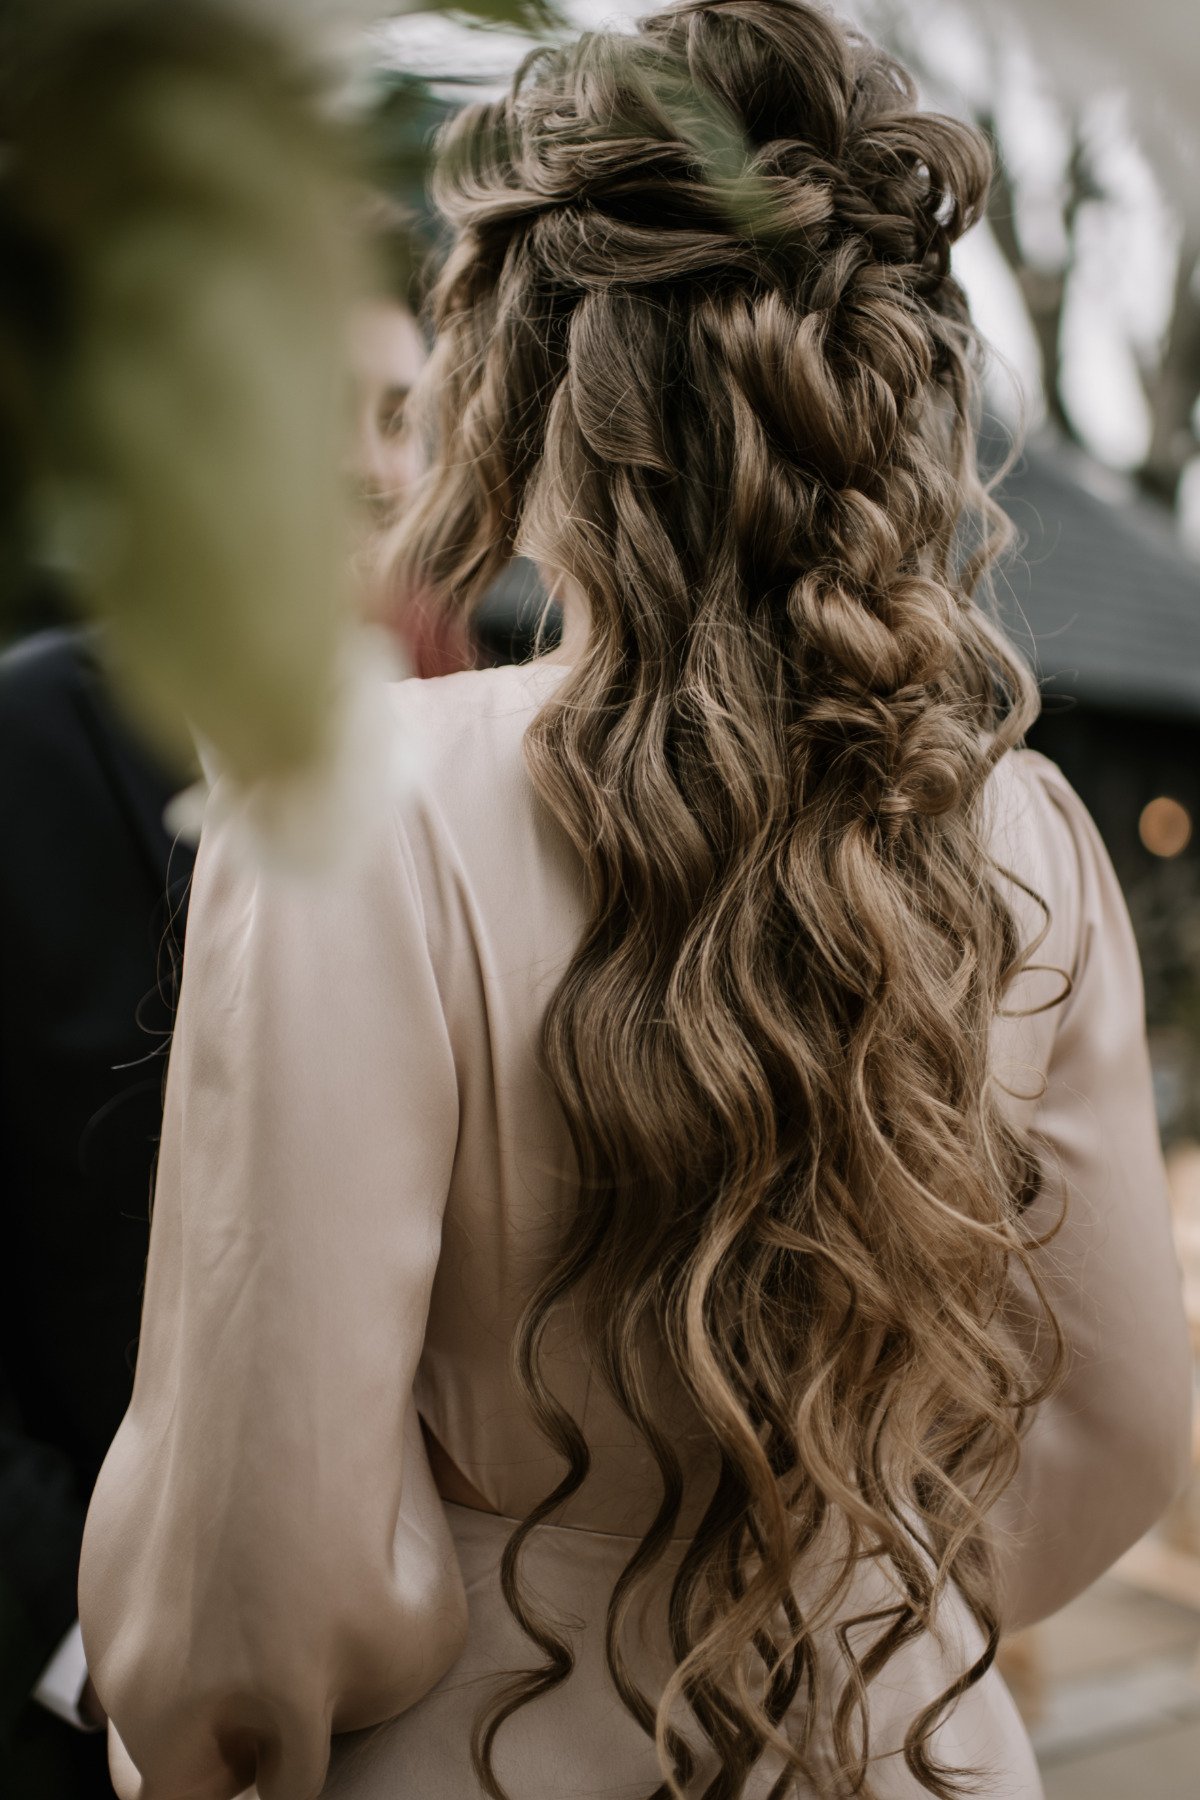 Rapunzel inspired wedding hair with long loose waves